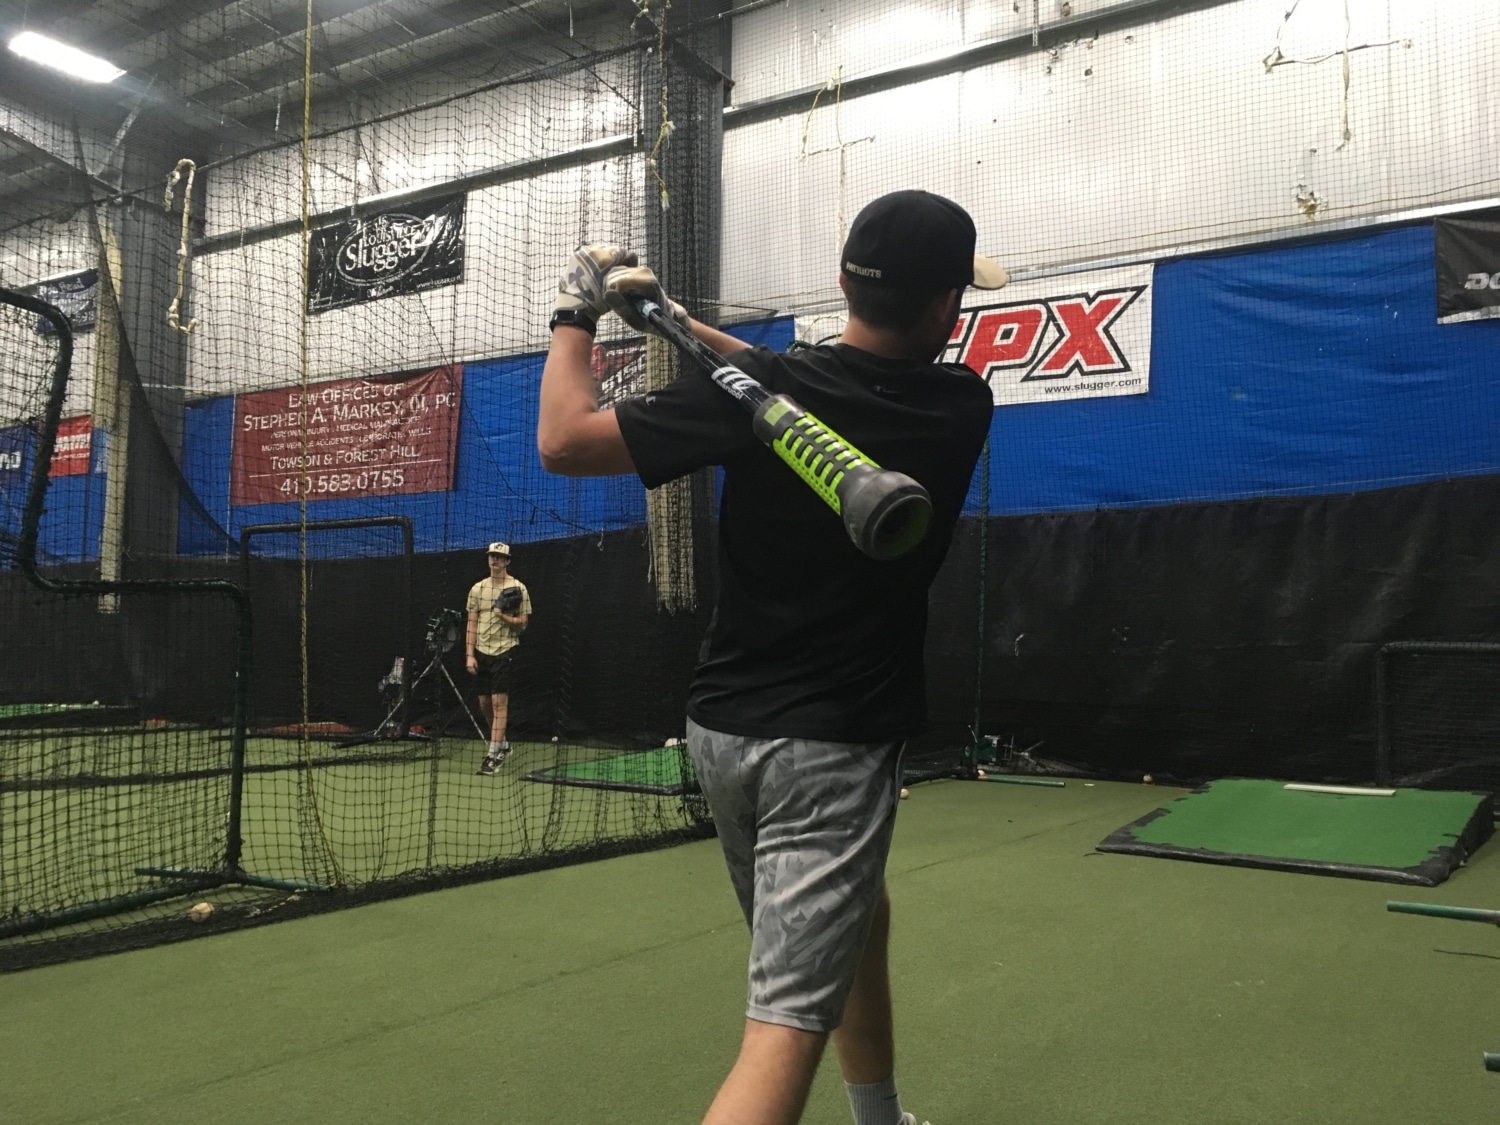 Benefits of Using Batting Weights for Your Swing - The Rocket